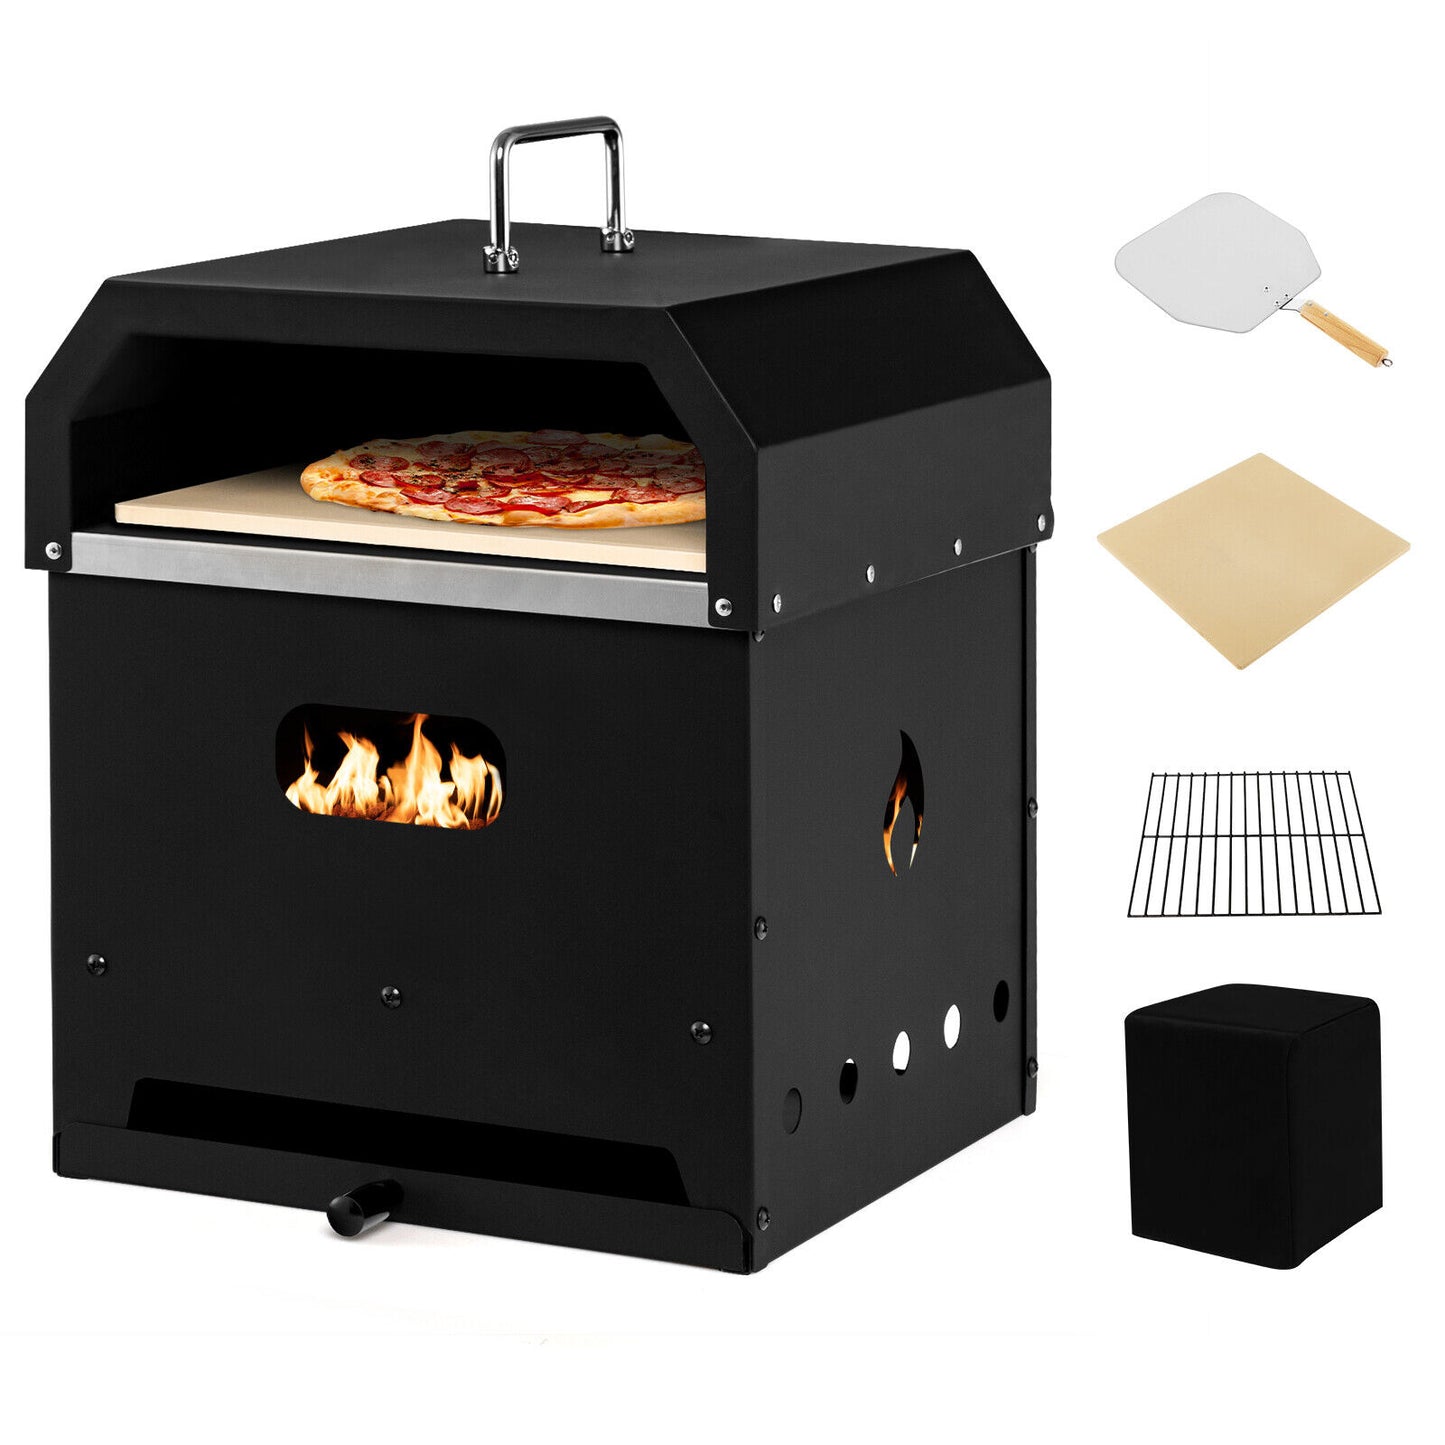 Pizza Oven -  4in1 Multipurpose Outdoor Pizza Oven